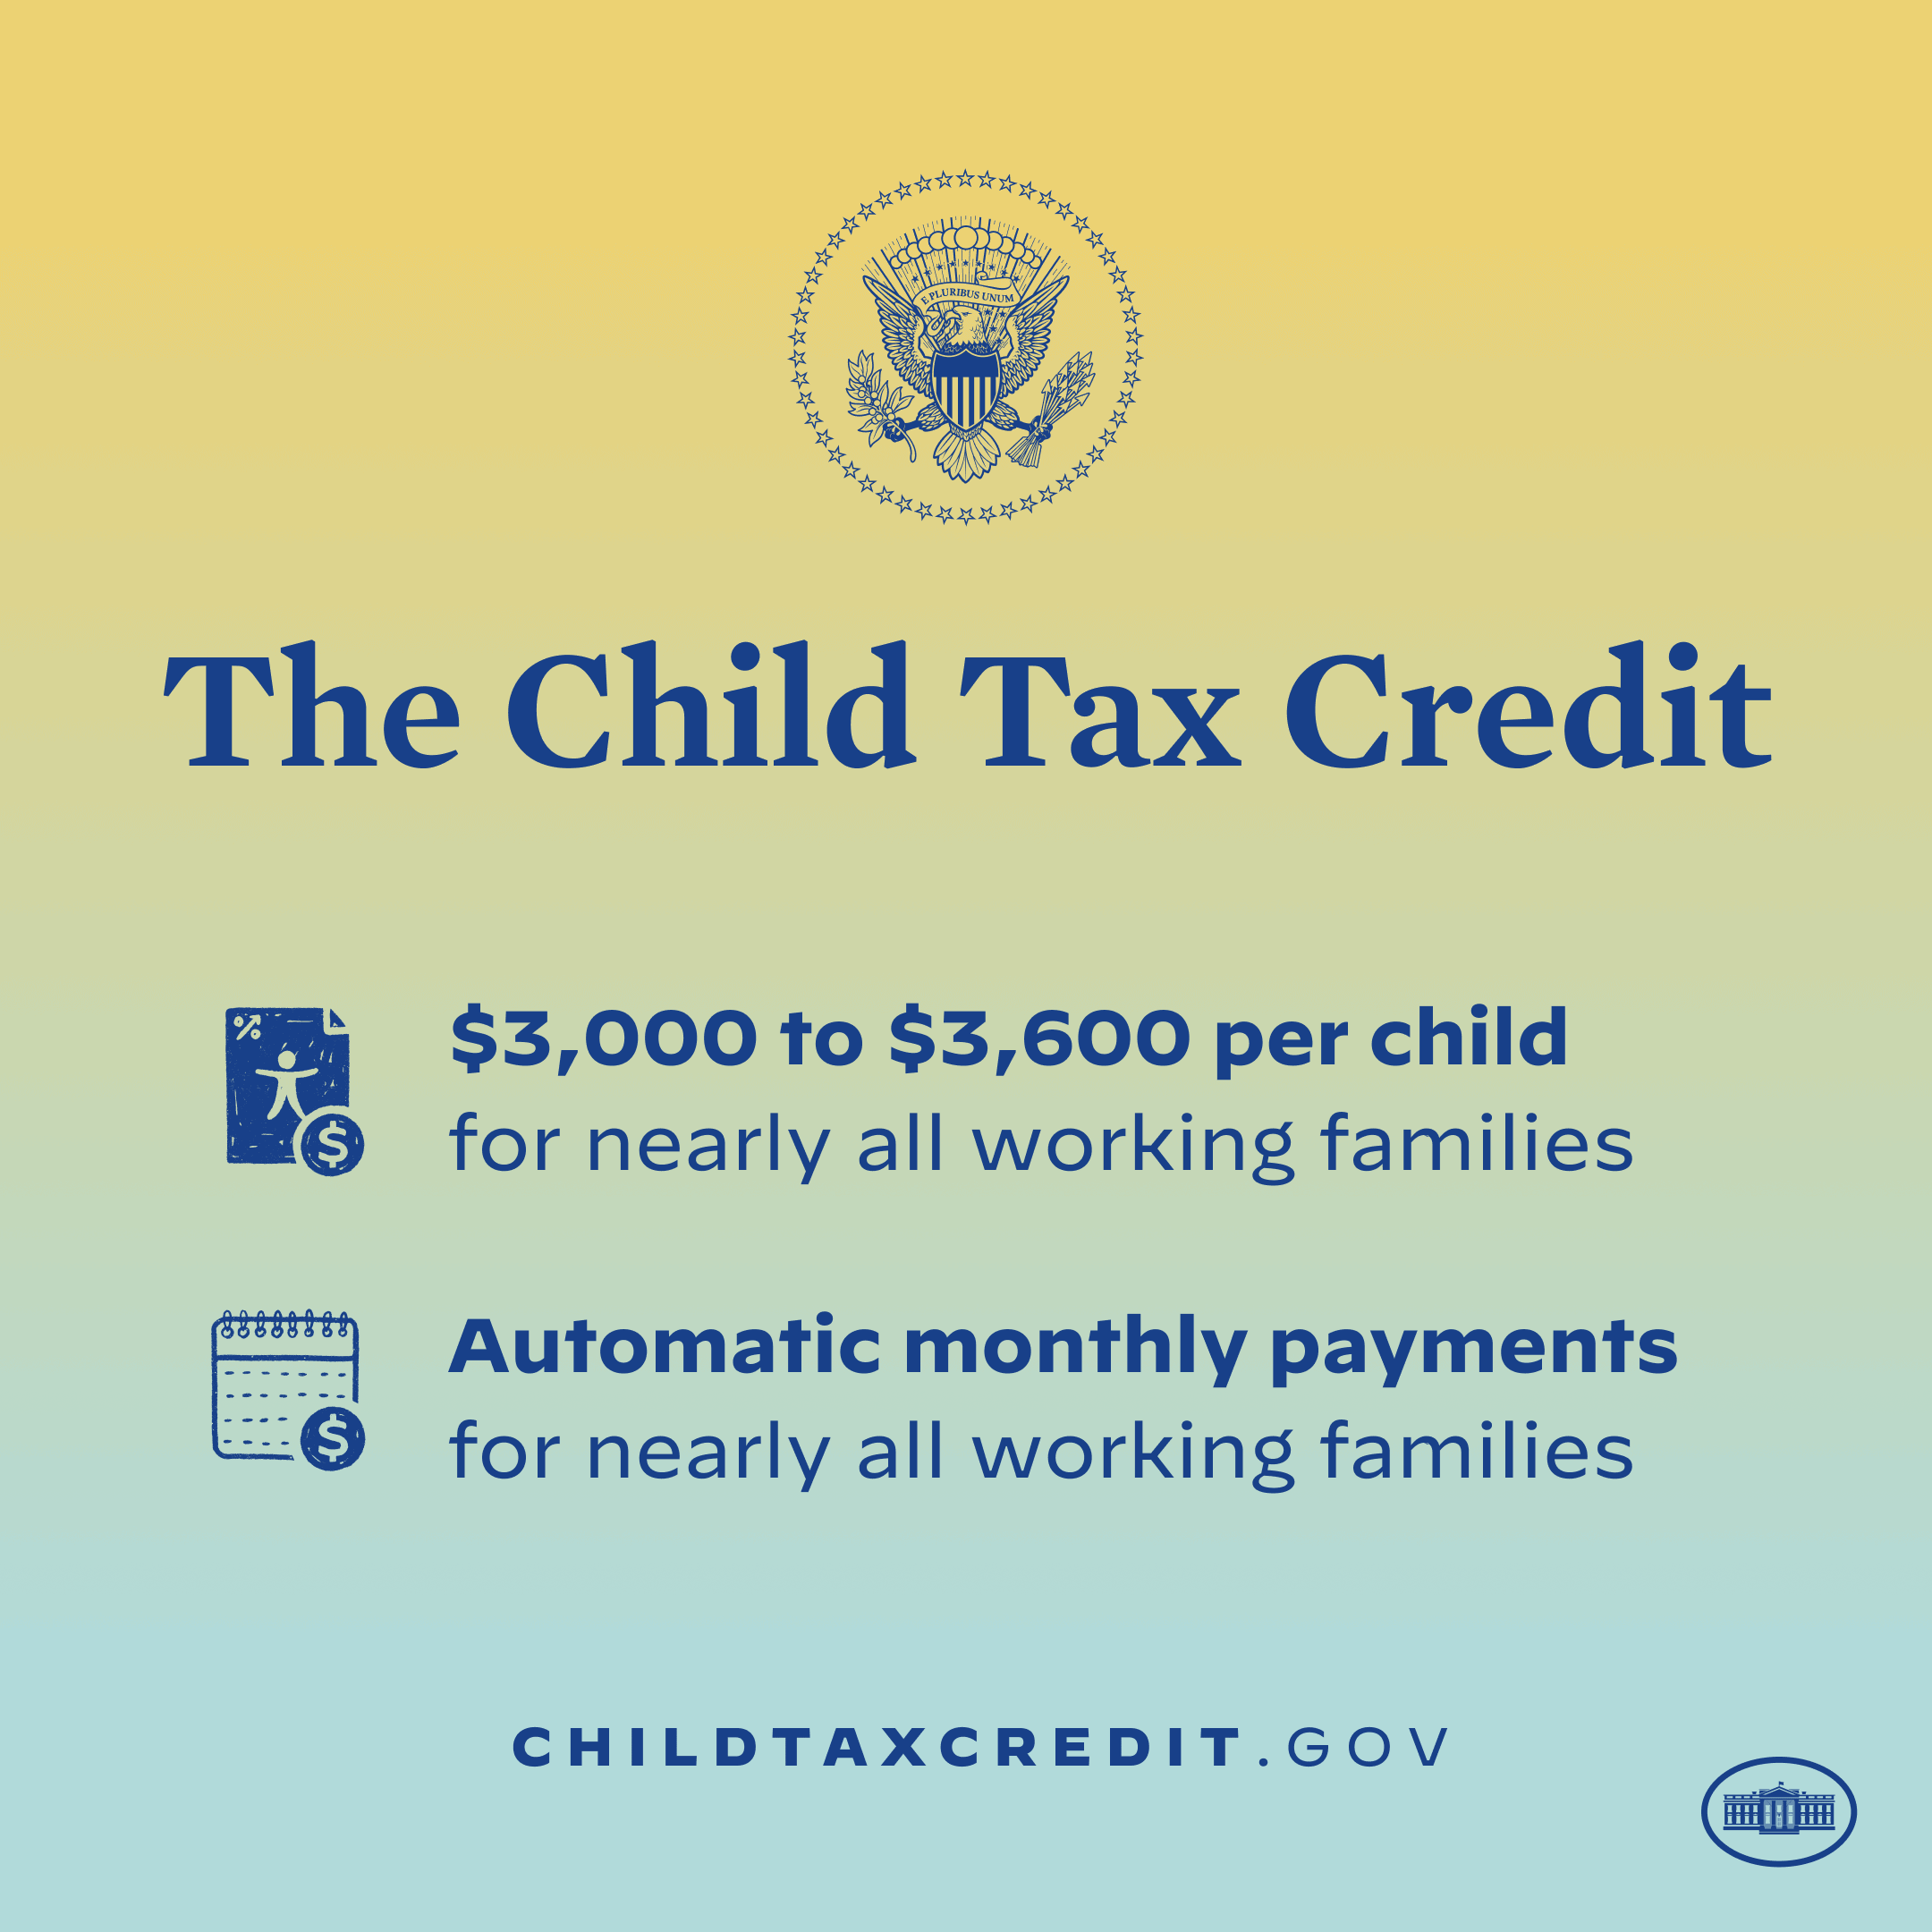 child-tax-credit-2021-payment-dates-joined-newsletter-navigateur